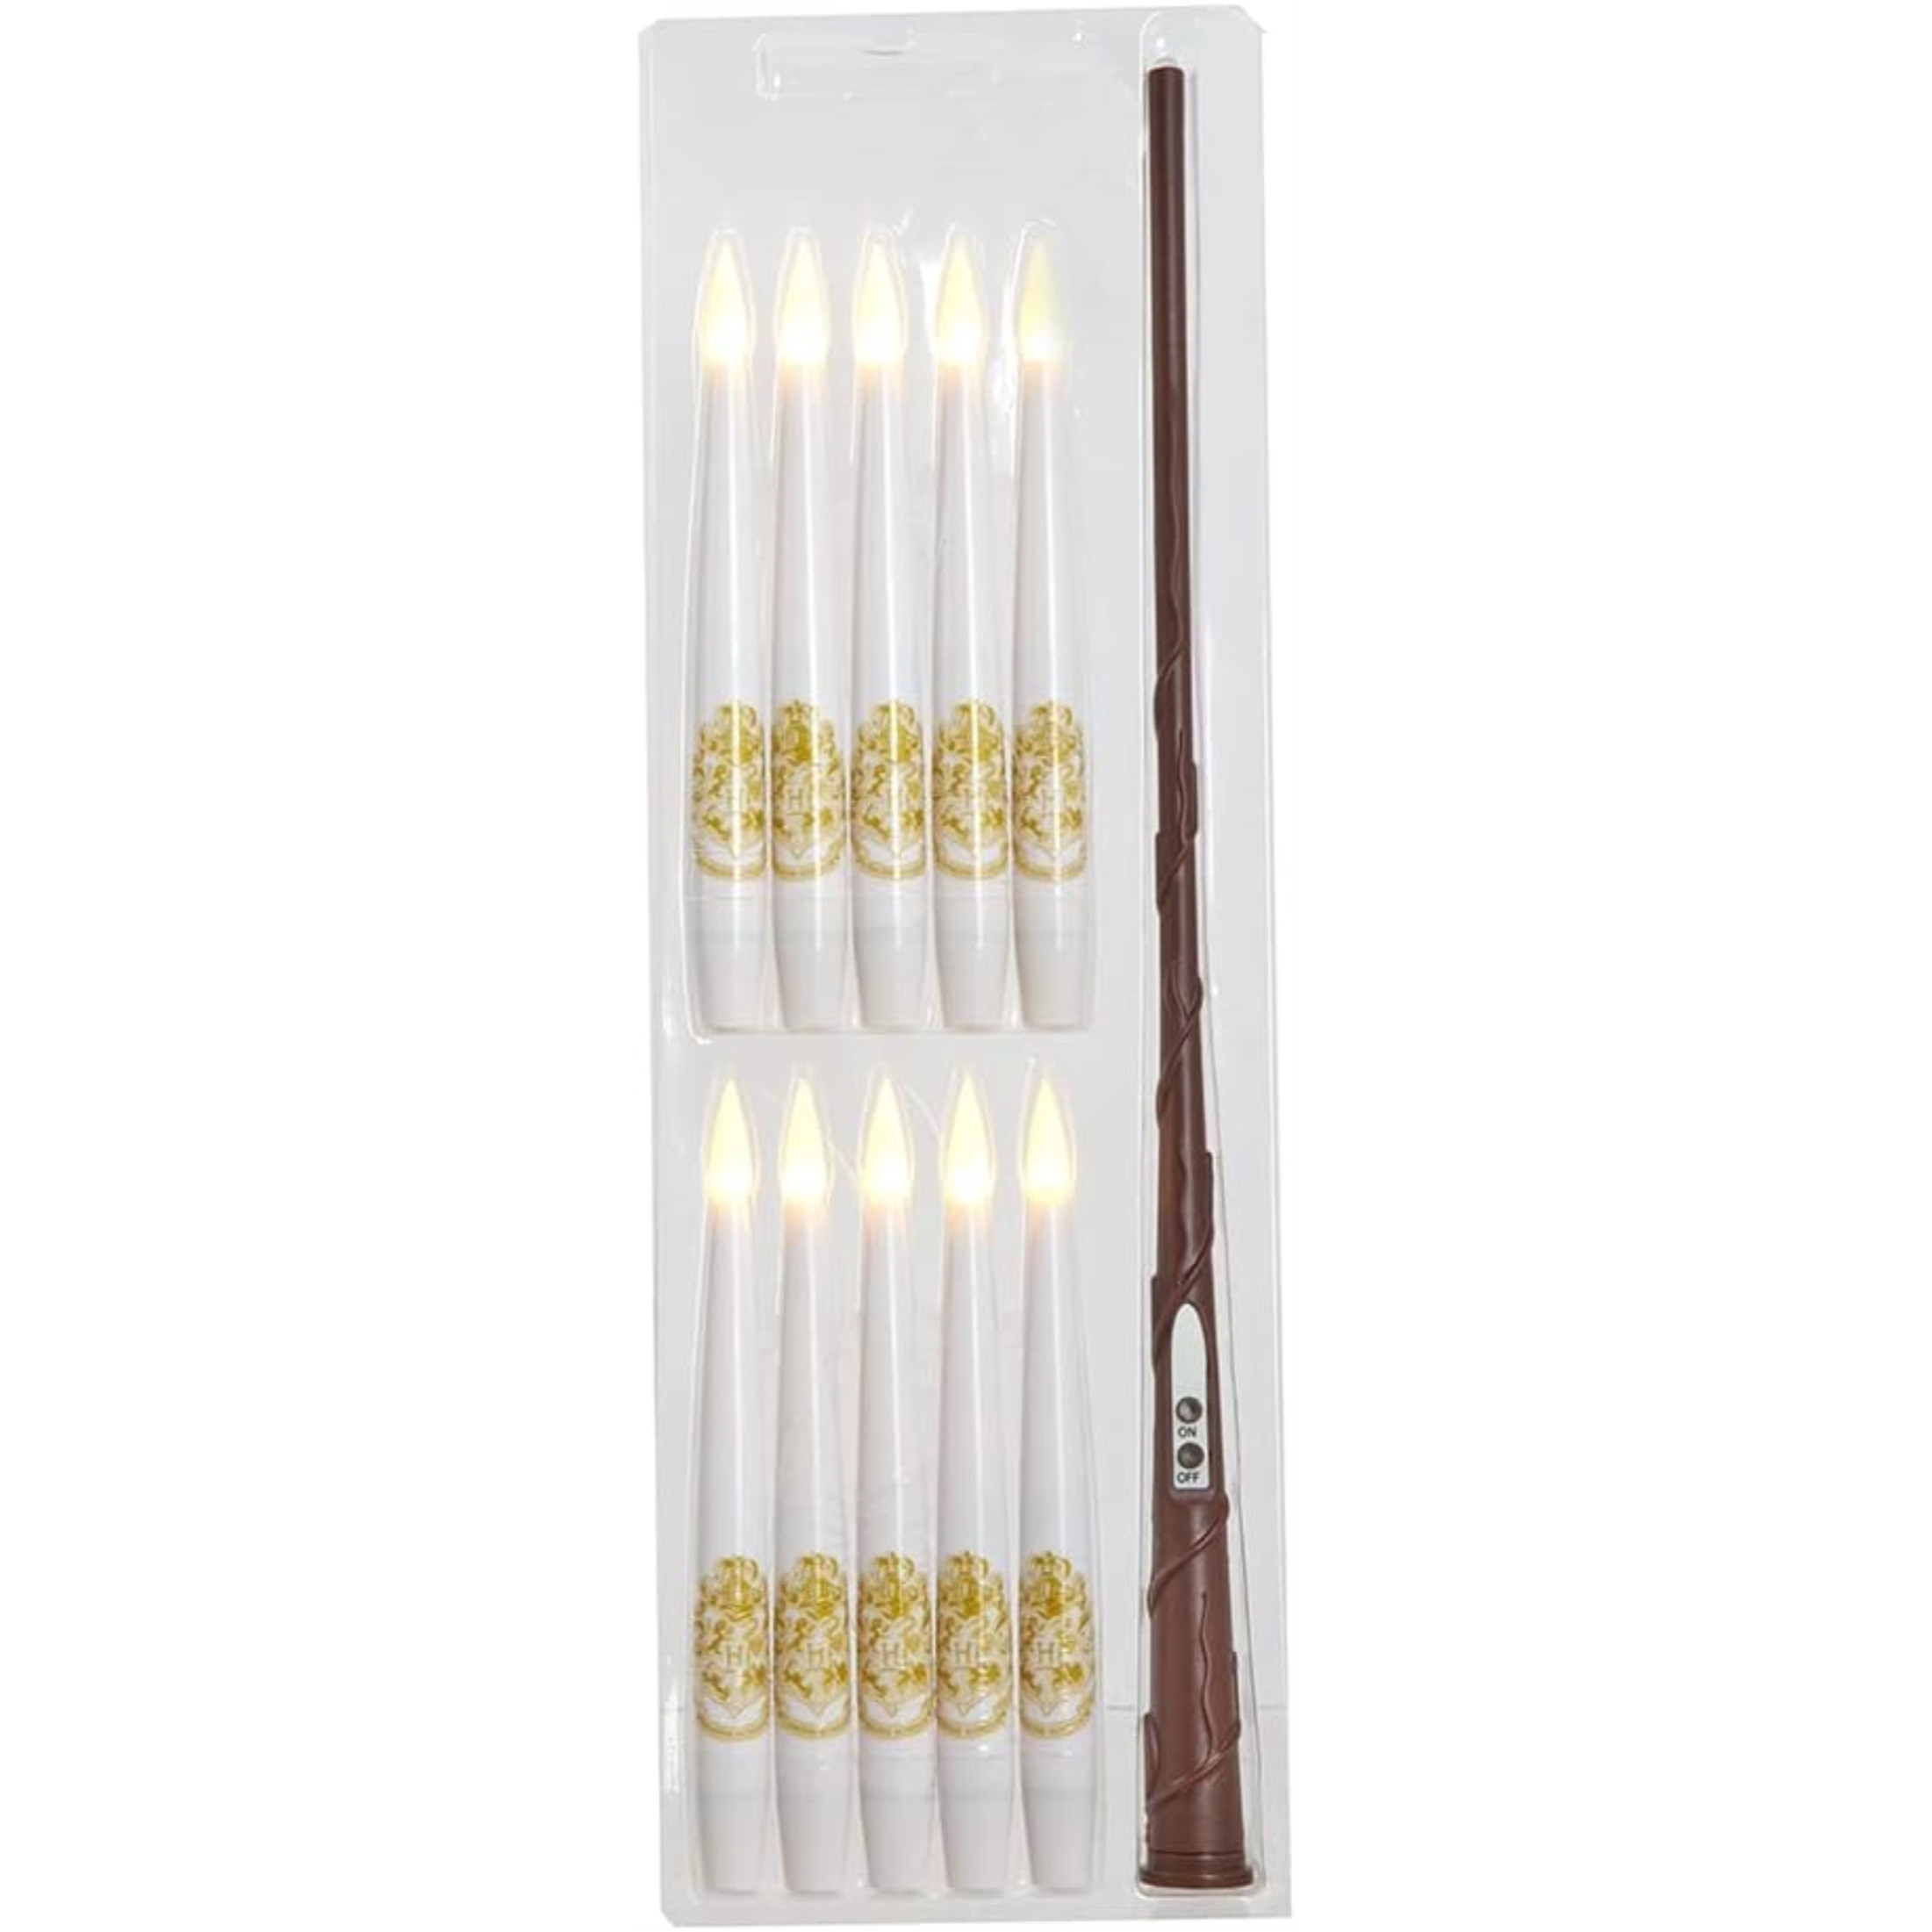 Kurt Adler Harry Potter 10 Floating Candles with Wand Remote Set Lights, White